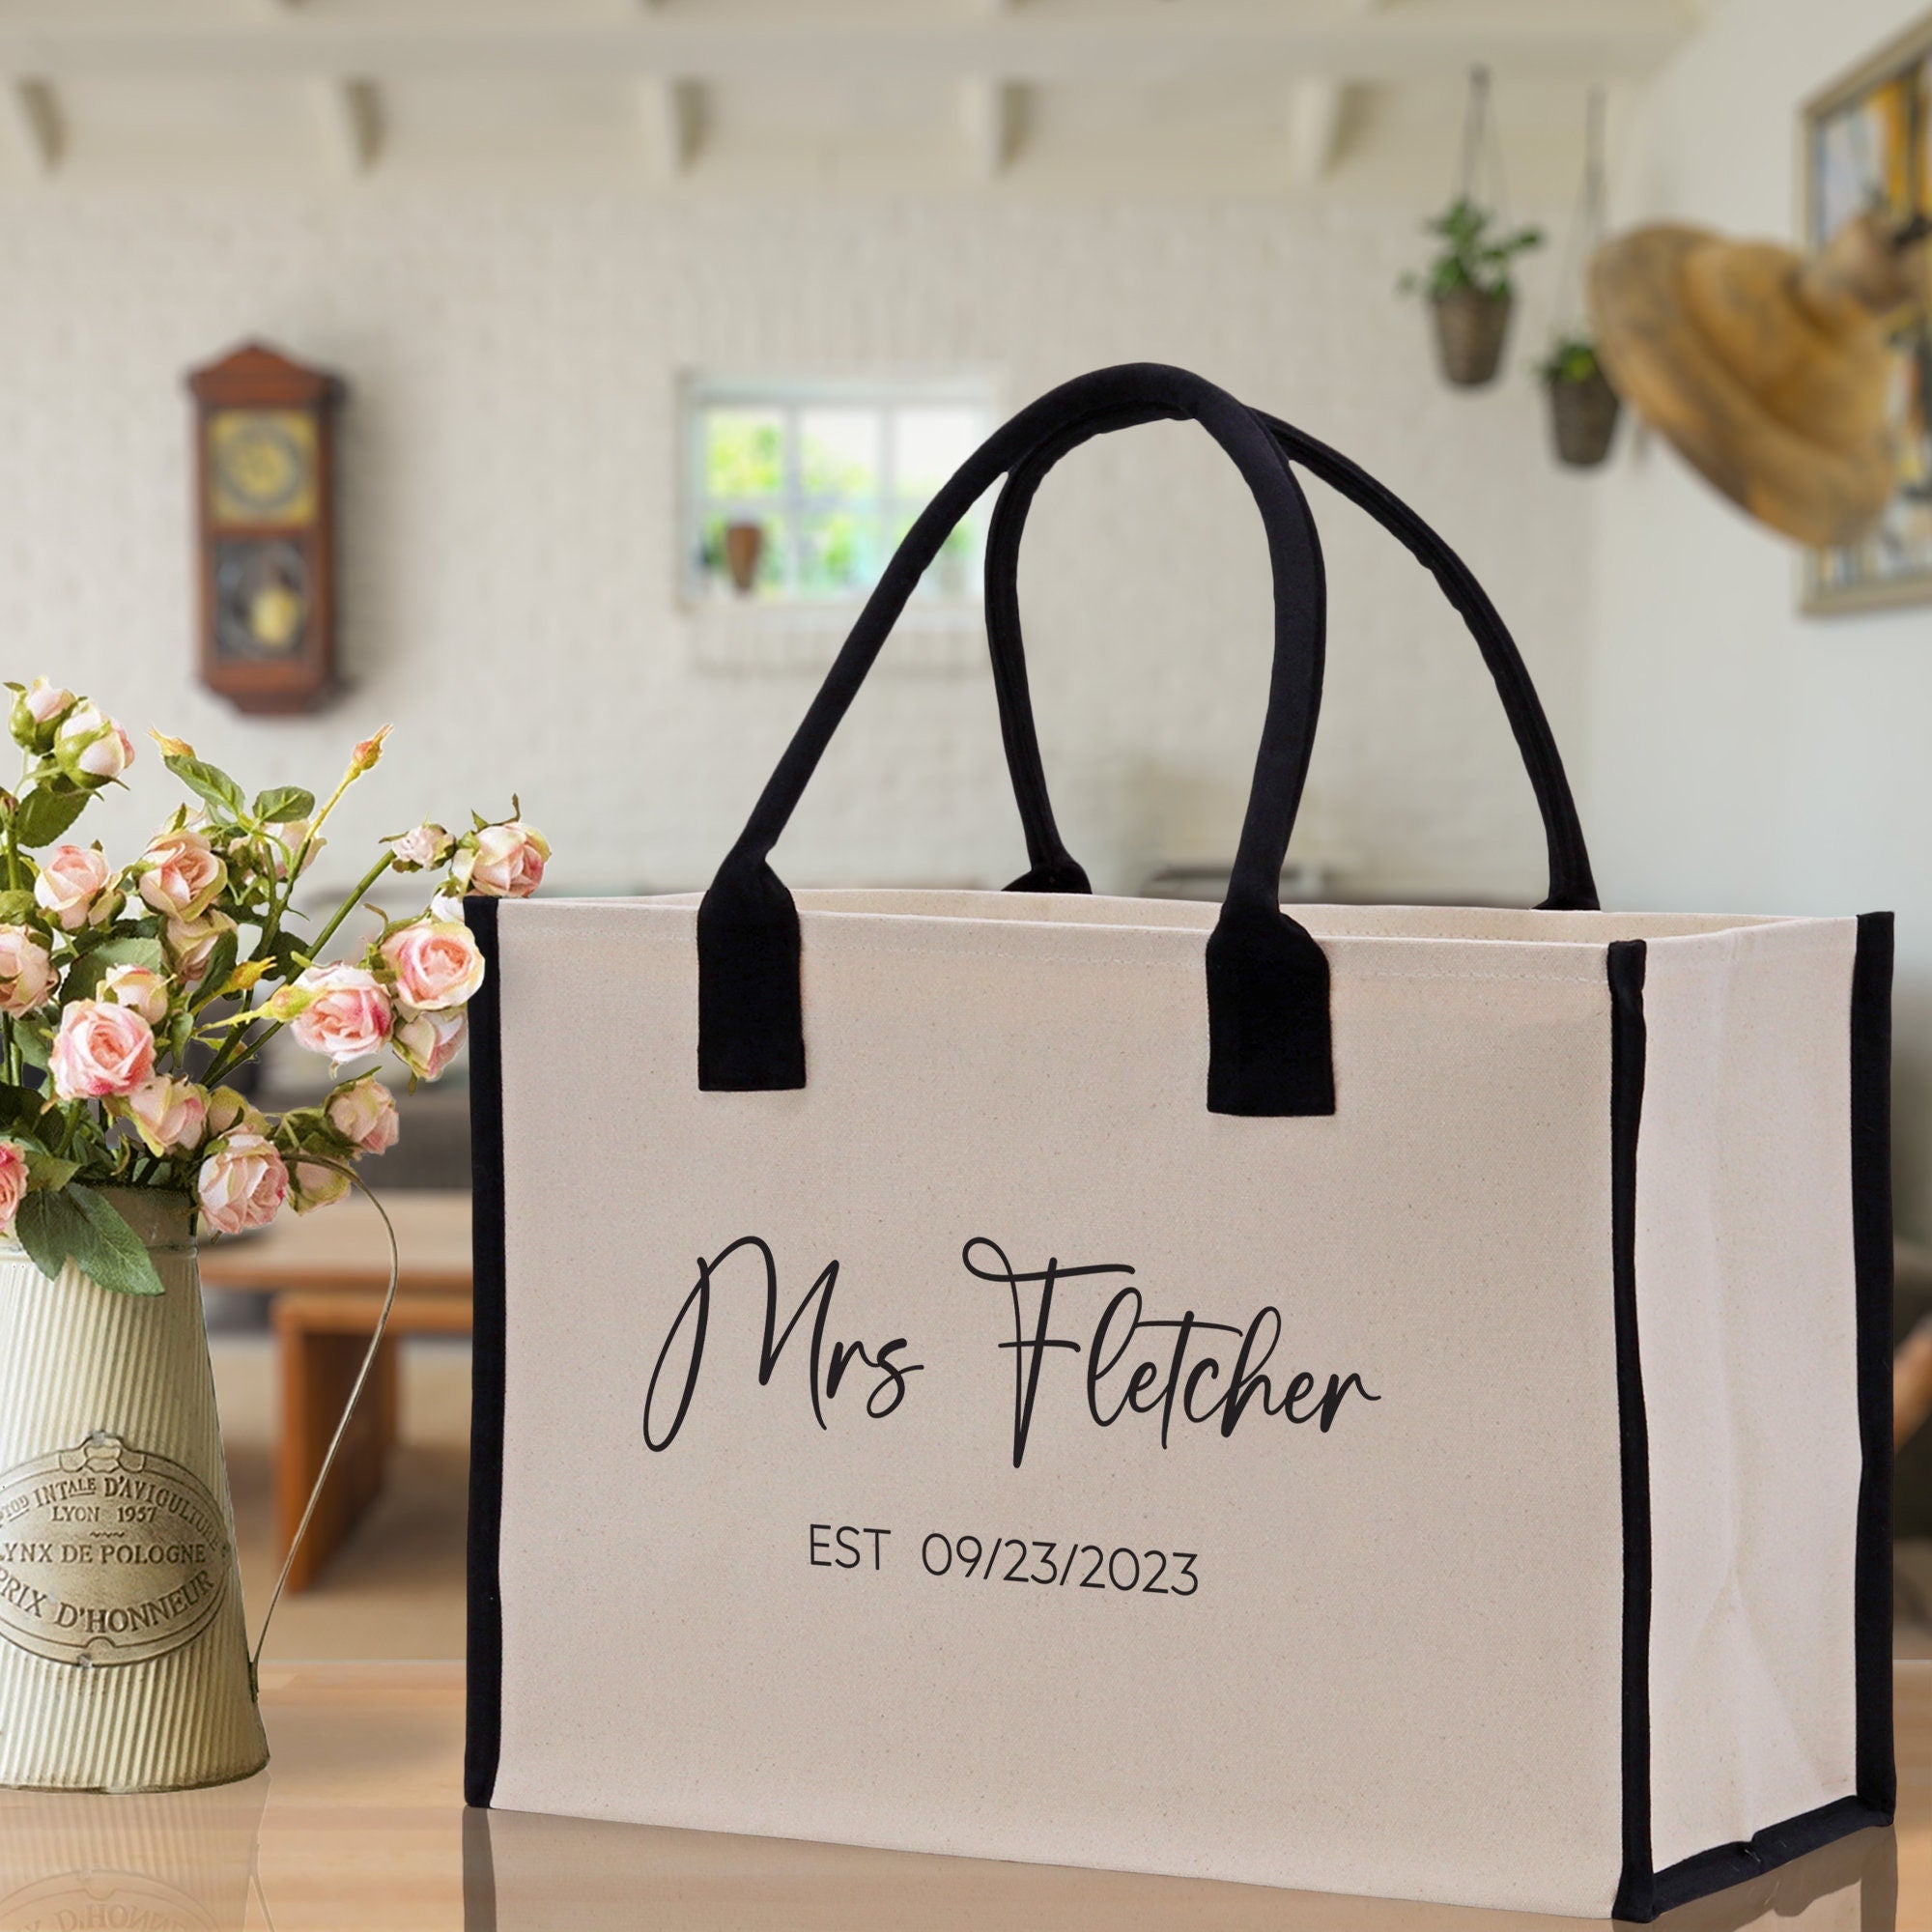 Mrs. Last Name Est Year Tote Bag Personalized Date Wedding Tote Bridal Shower Gift Honeymoon Gift Customized Wedding Gift Bridesmaid Gif